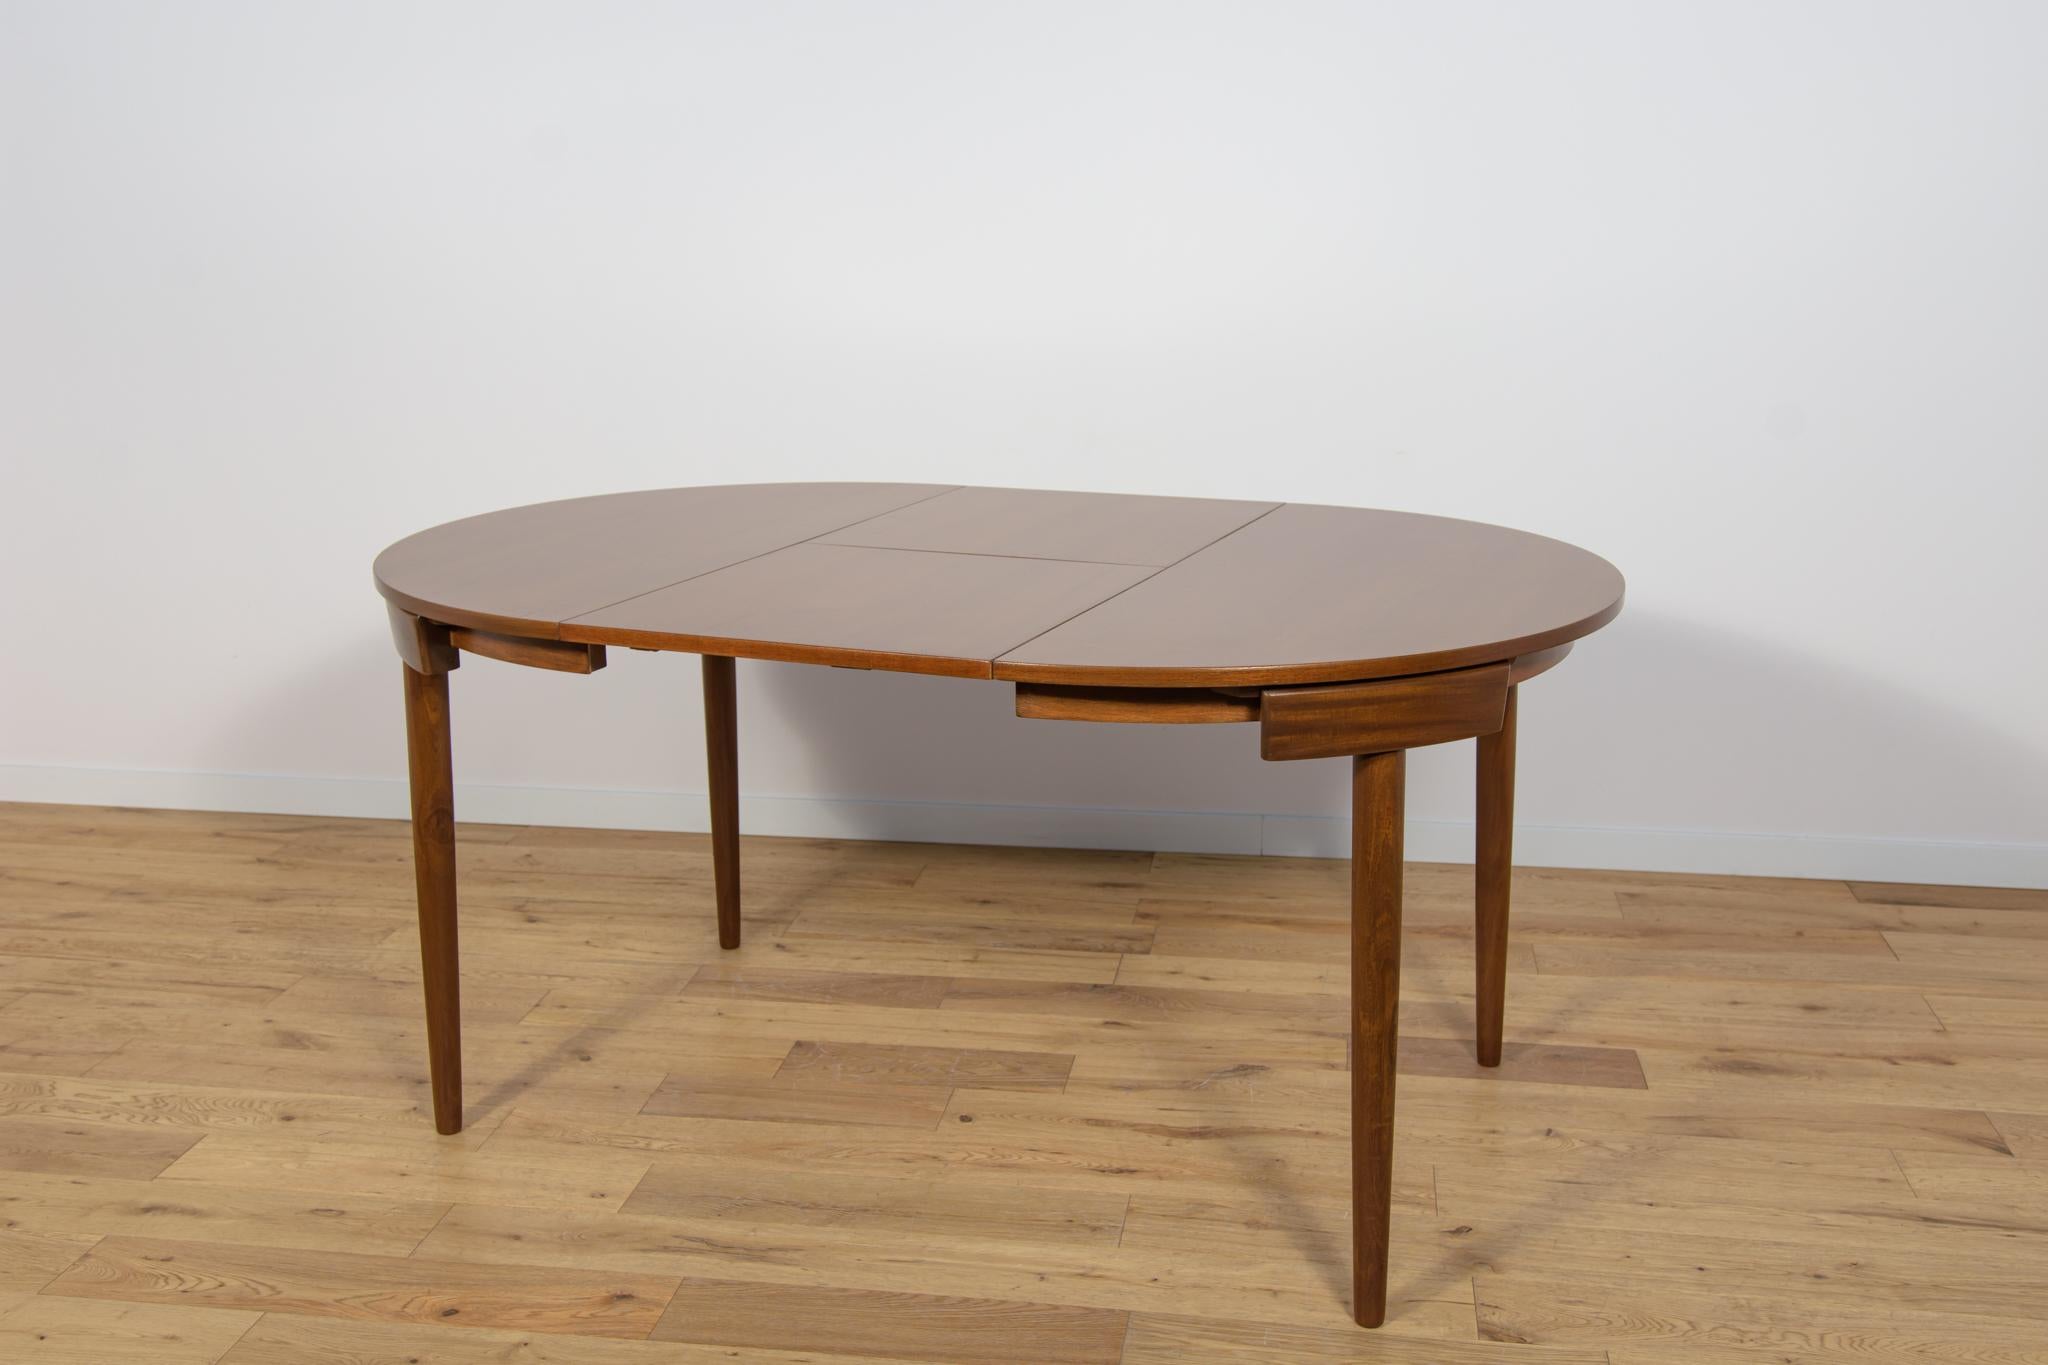  Mid-Century Teak Dining Table and Chairs Set by Hans Olsen for Frem Røjle. For Sale 9